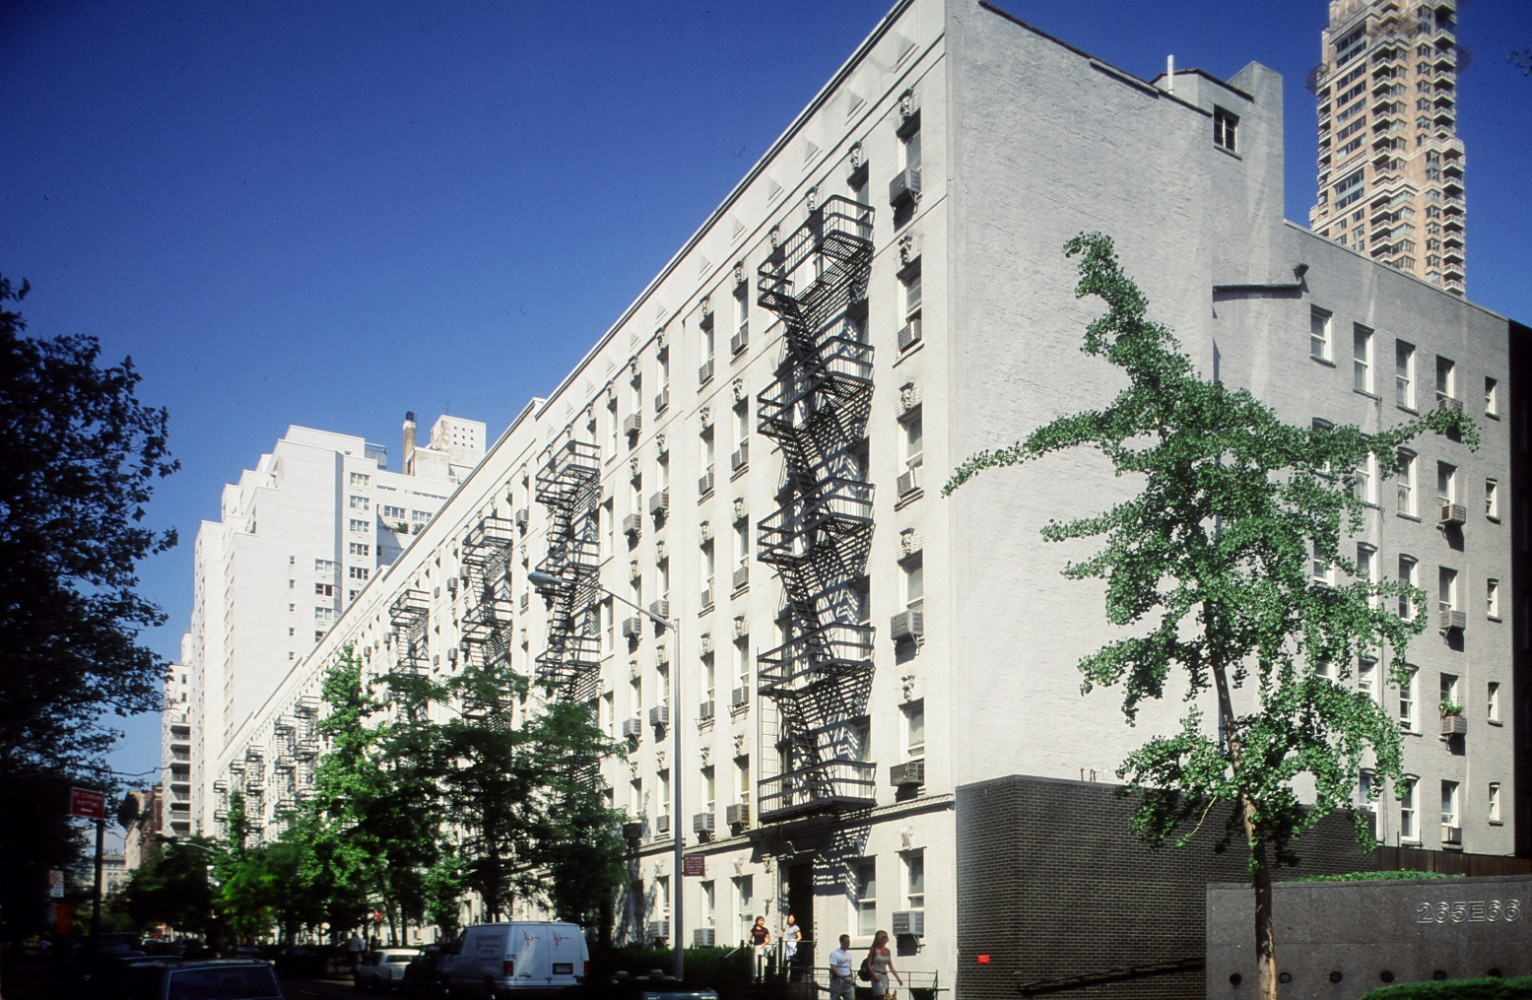 Apartment Complexes In NYC - Manhattan East - Upper East Side